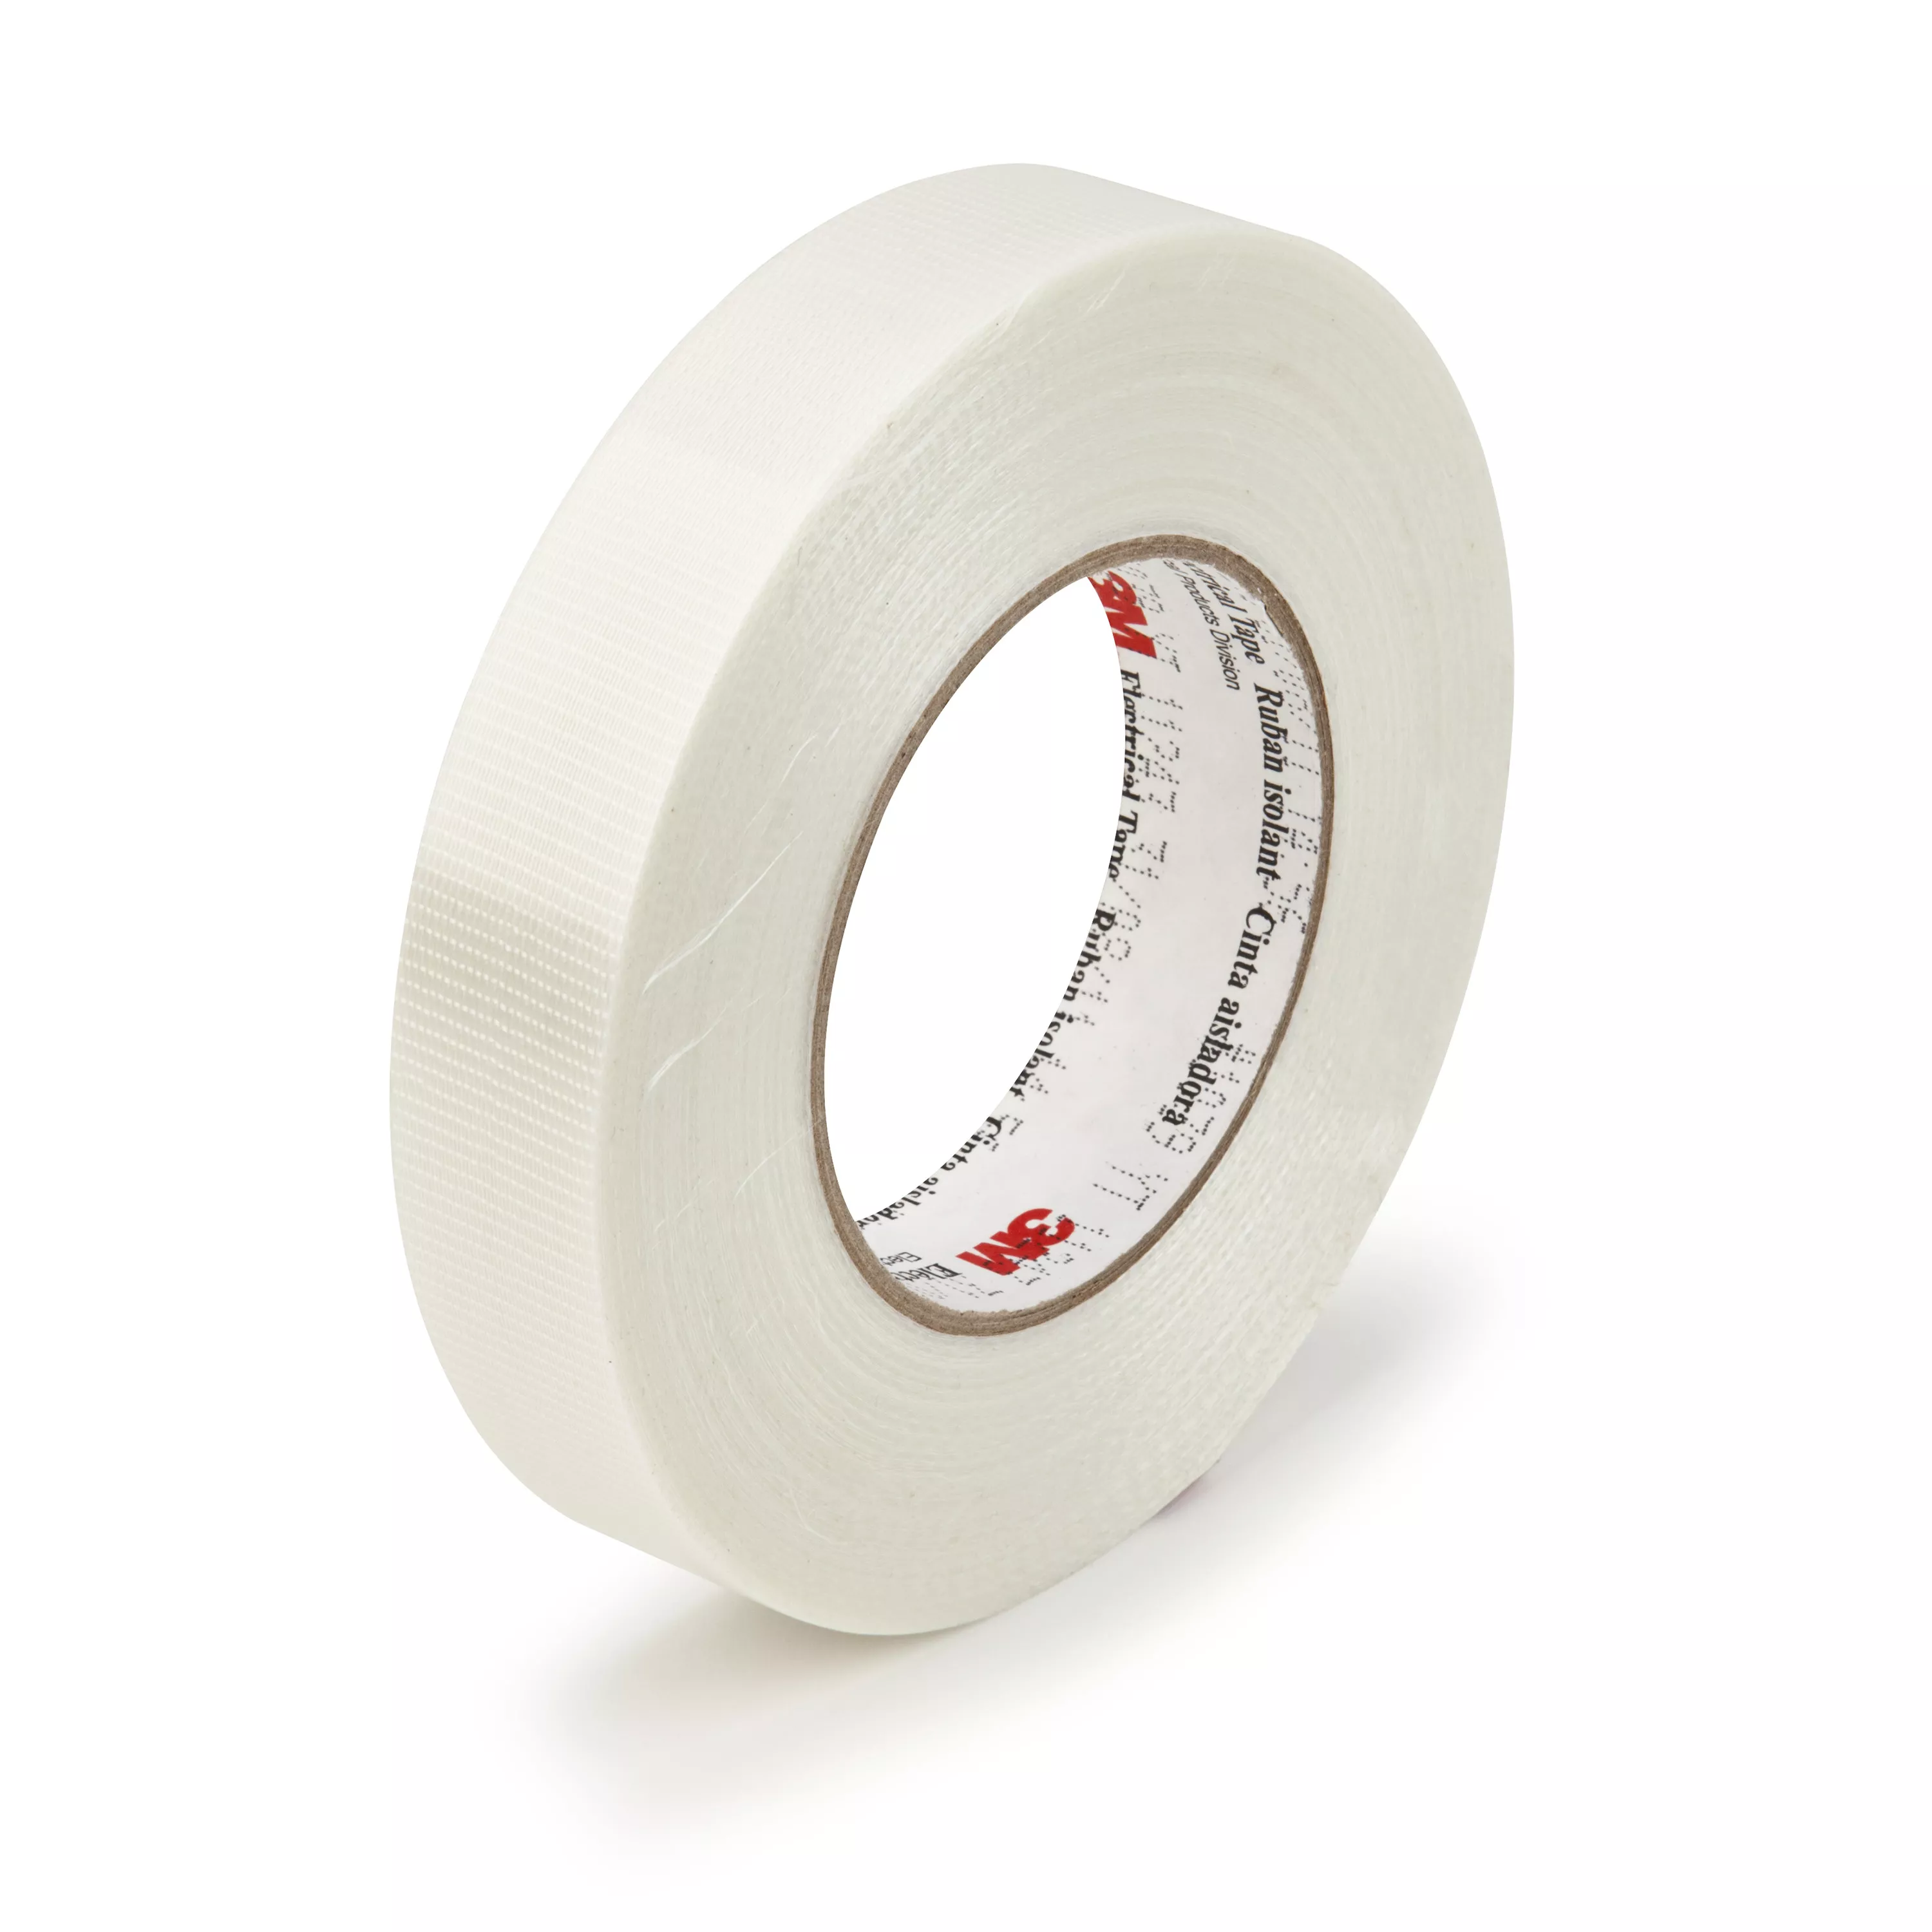 3M™ Filament-Reinforced Electrical Tape 1039, 3 in X 60 yds, paper core,
Log roll, 16 Rolls/Case